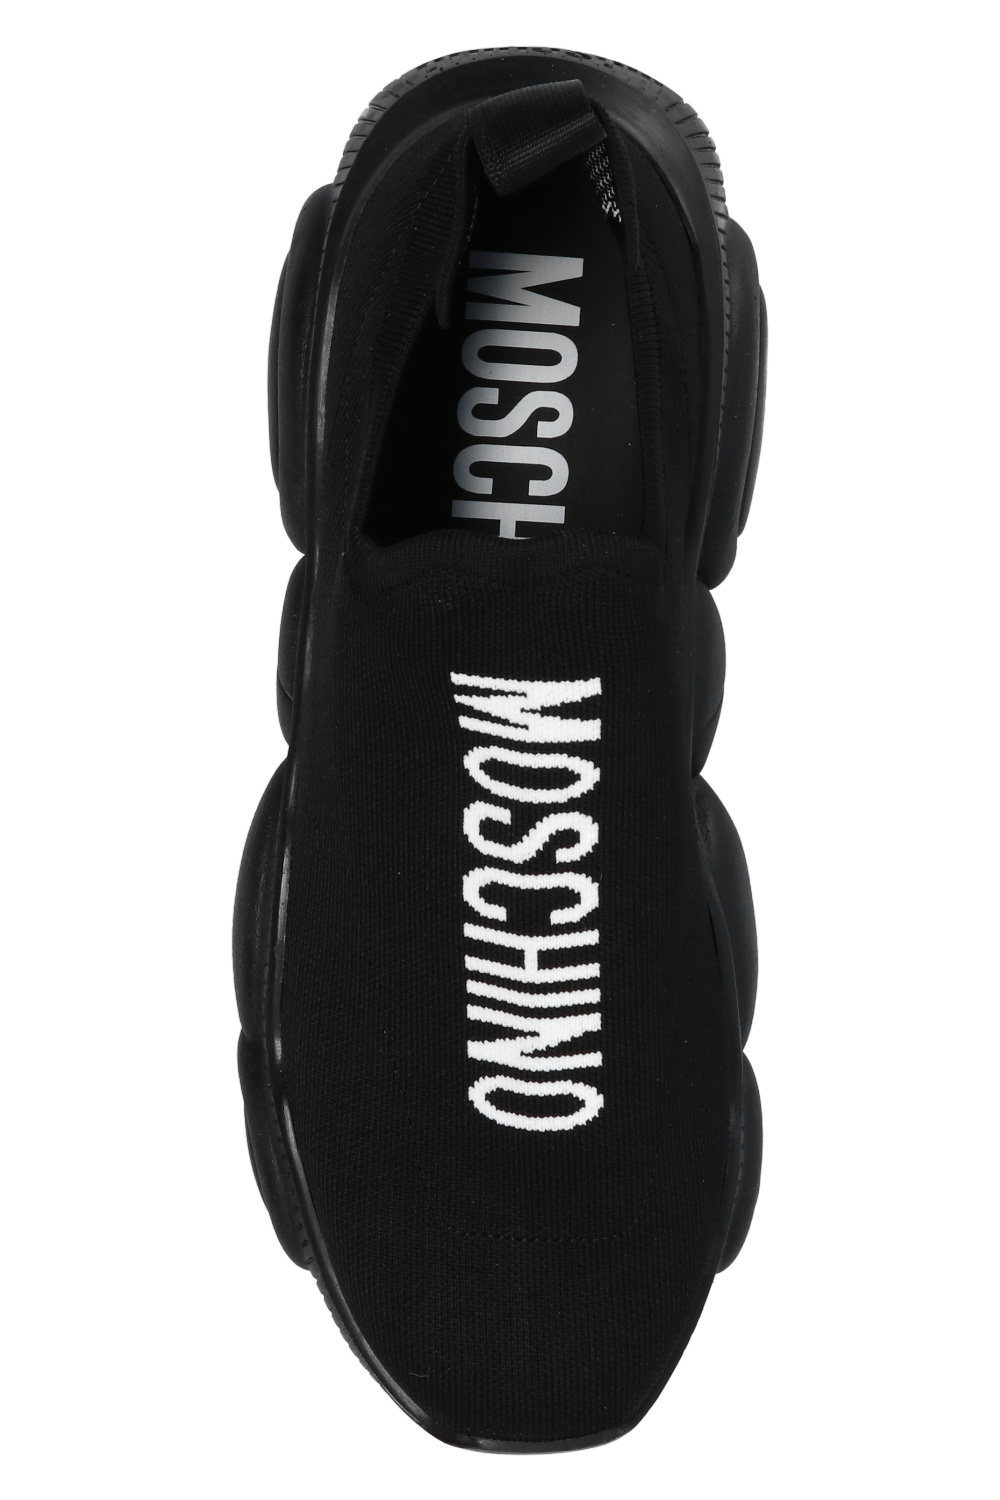 Moschino Touch 15 B Ankle Boot